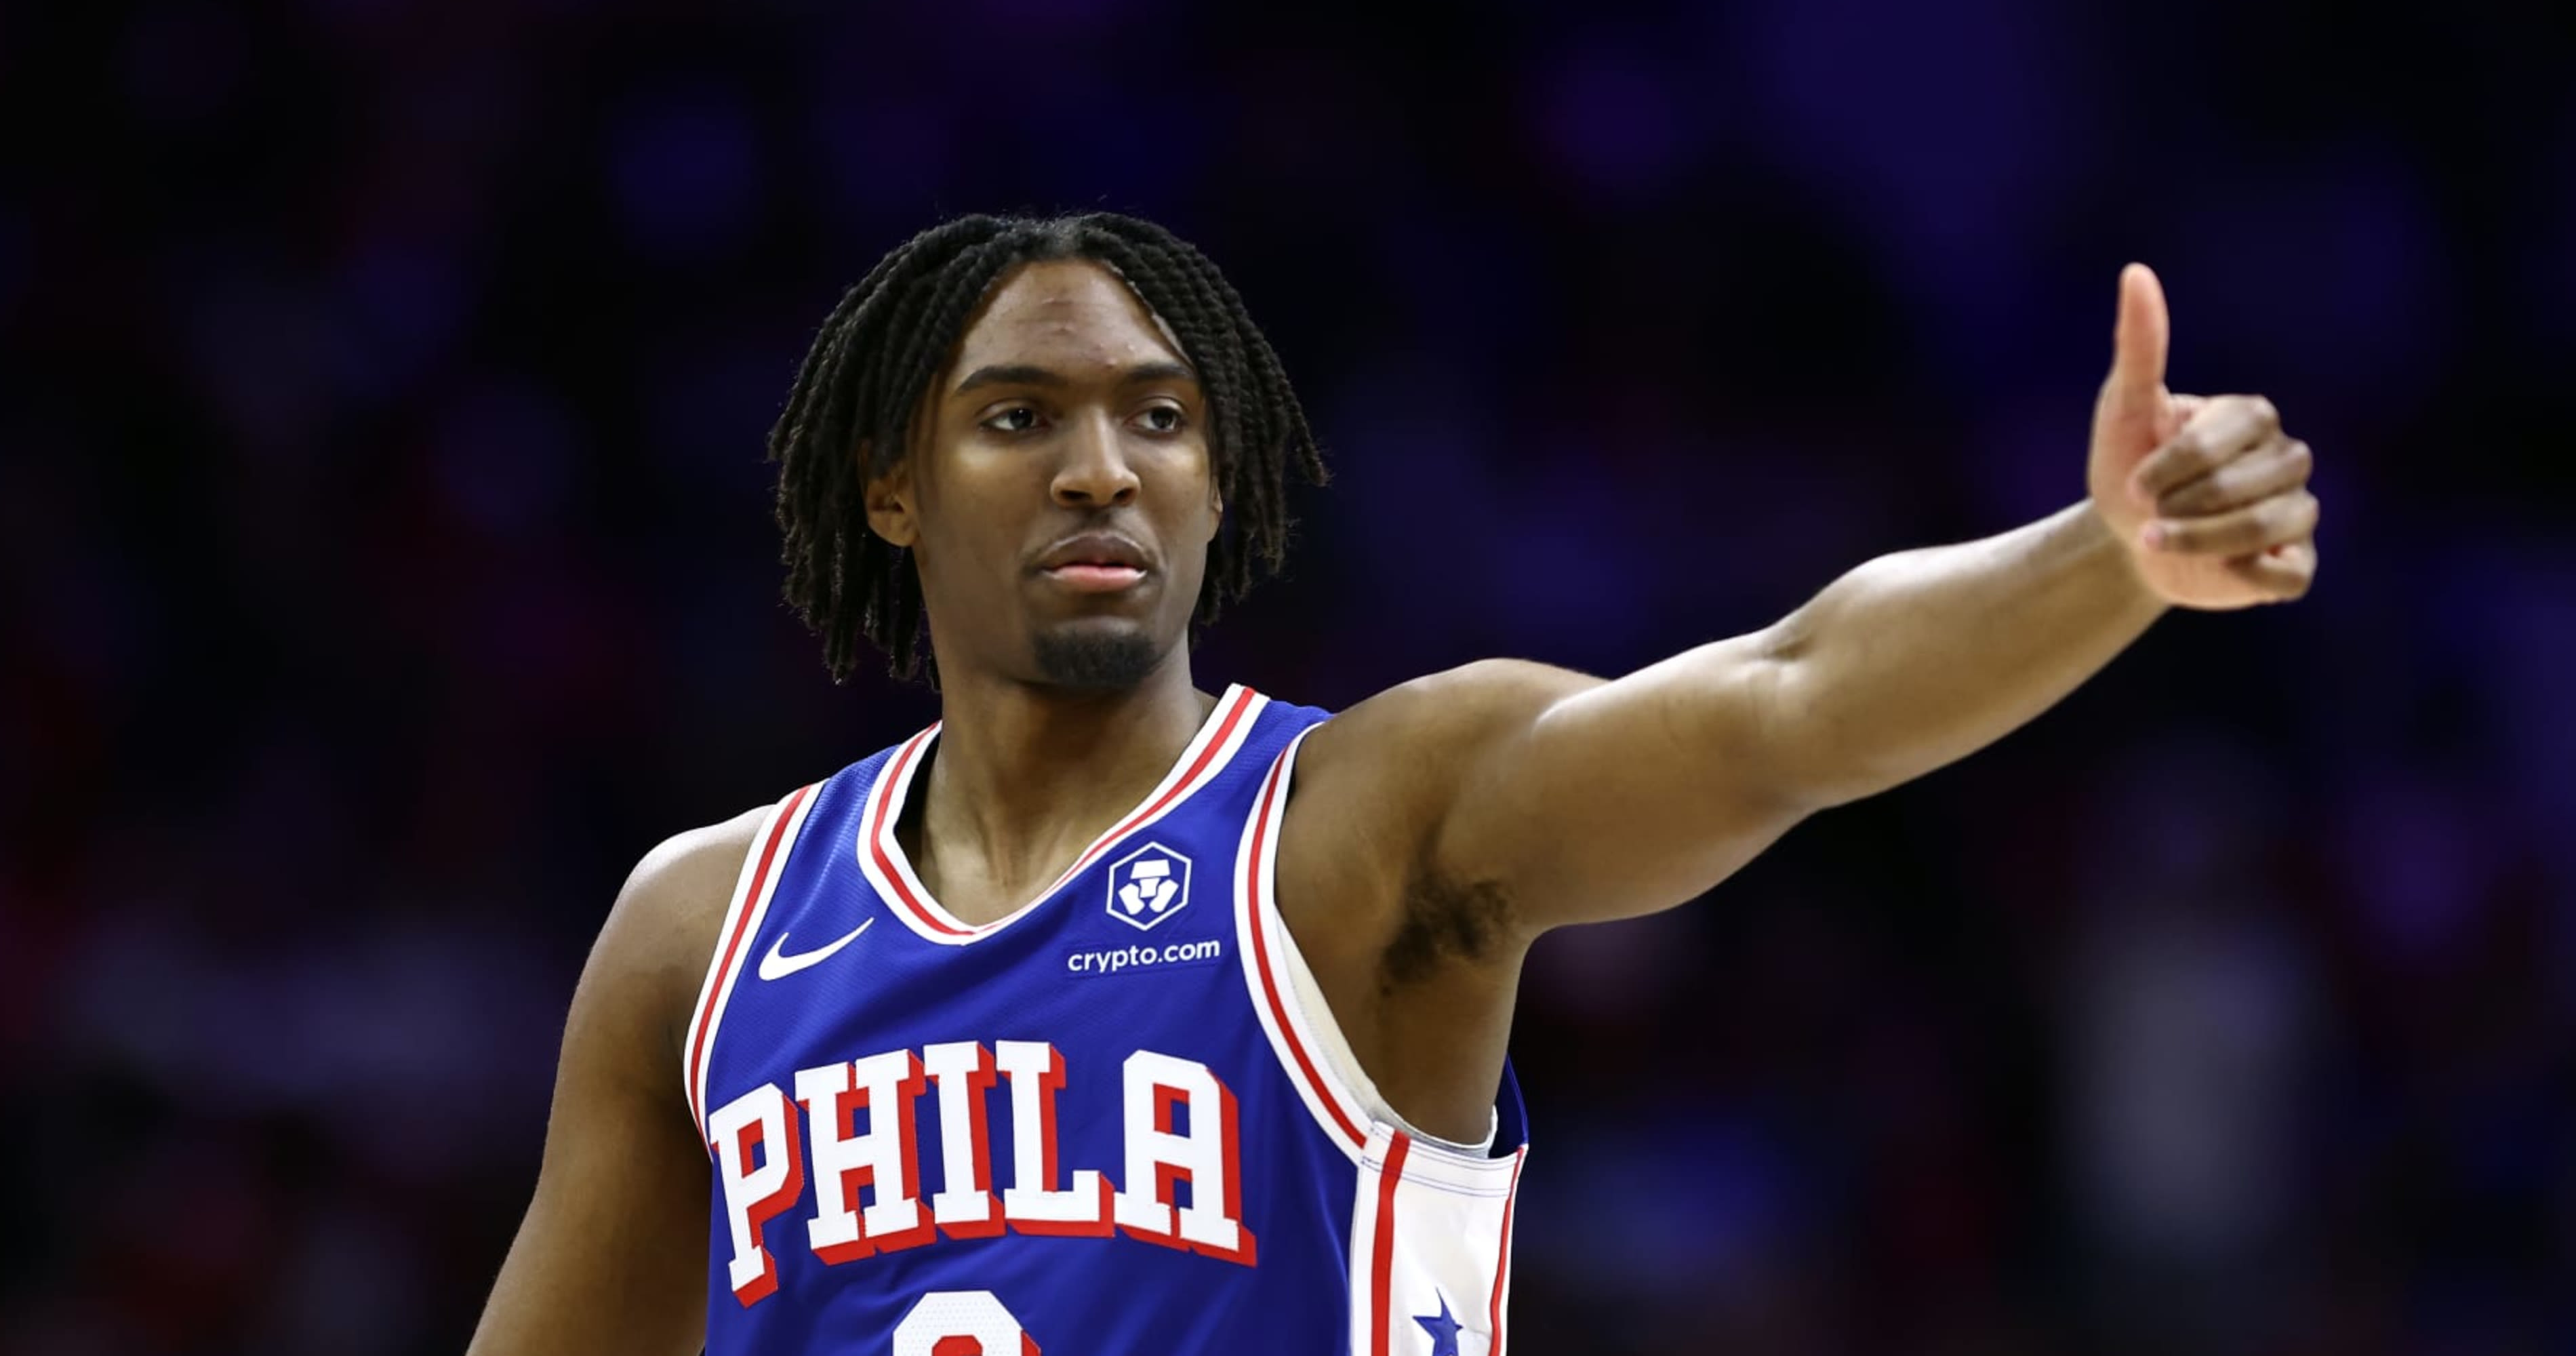 NBA Rumors: 76ers' Tyrese Maxey in Line for Max Contract amid Paul George Buzz